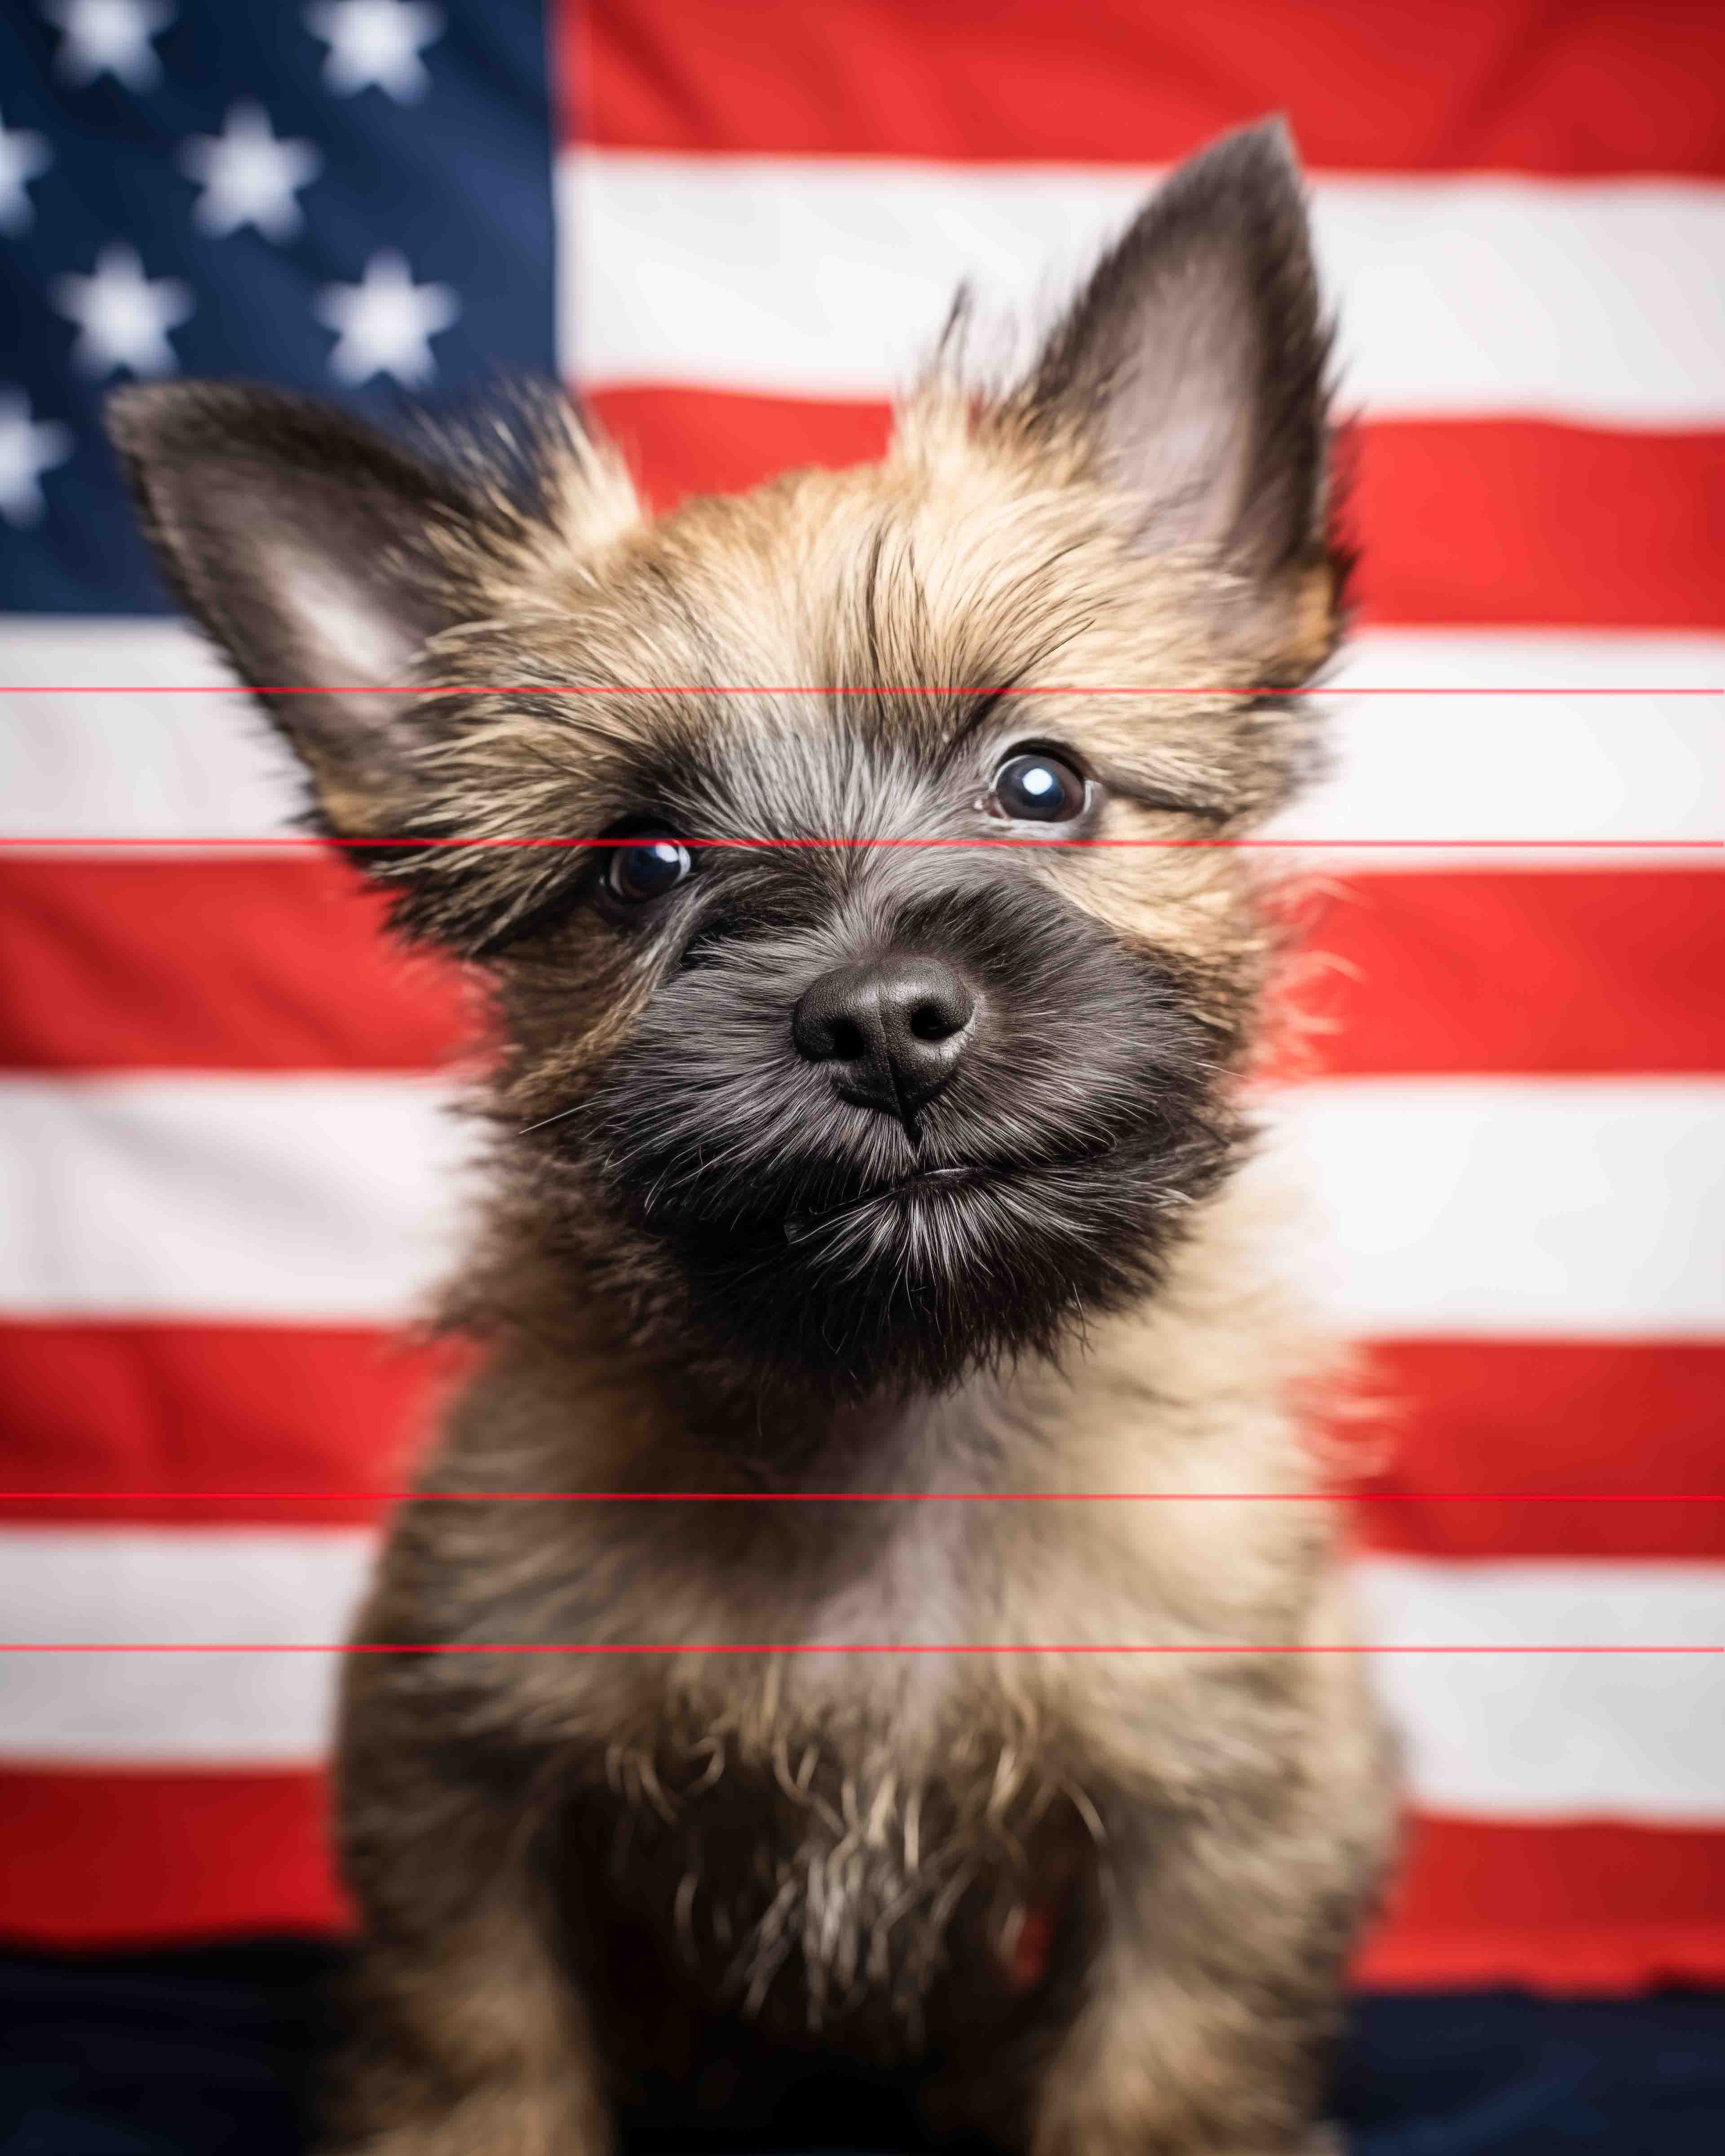 A Cairn terrier dog with a little smile in its black mask, features pointy ears and a little dark snout, is portrayed in front of a blurred american flag background with the focus is on the dog's expressive face and textured fur.